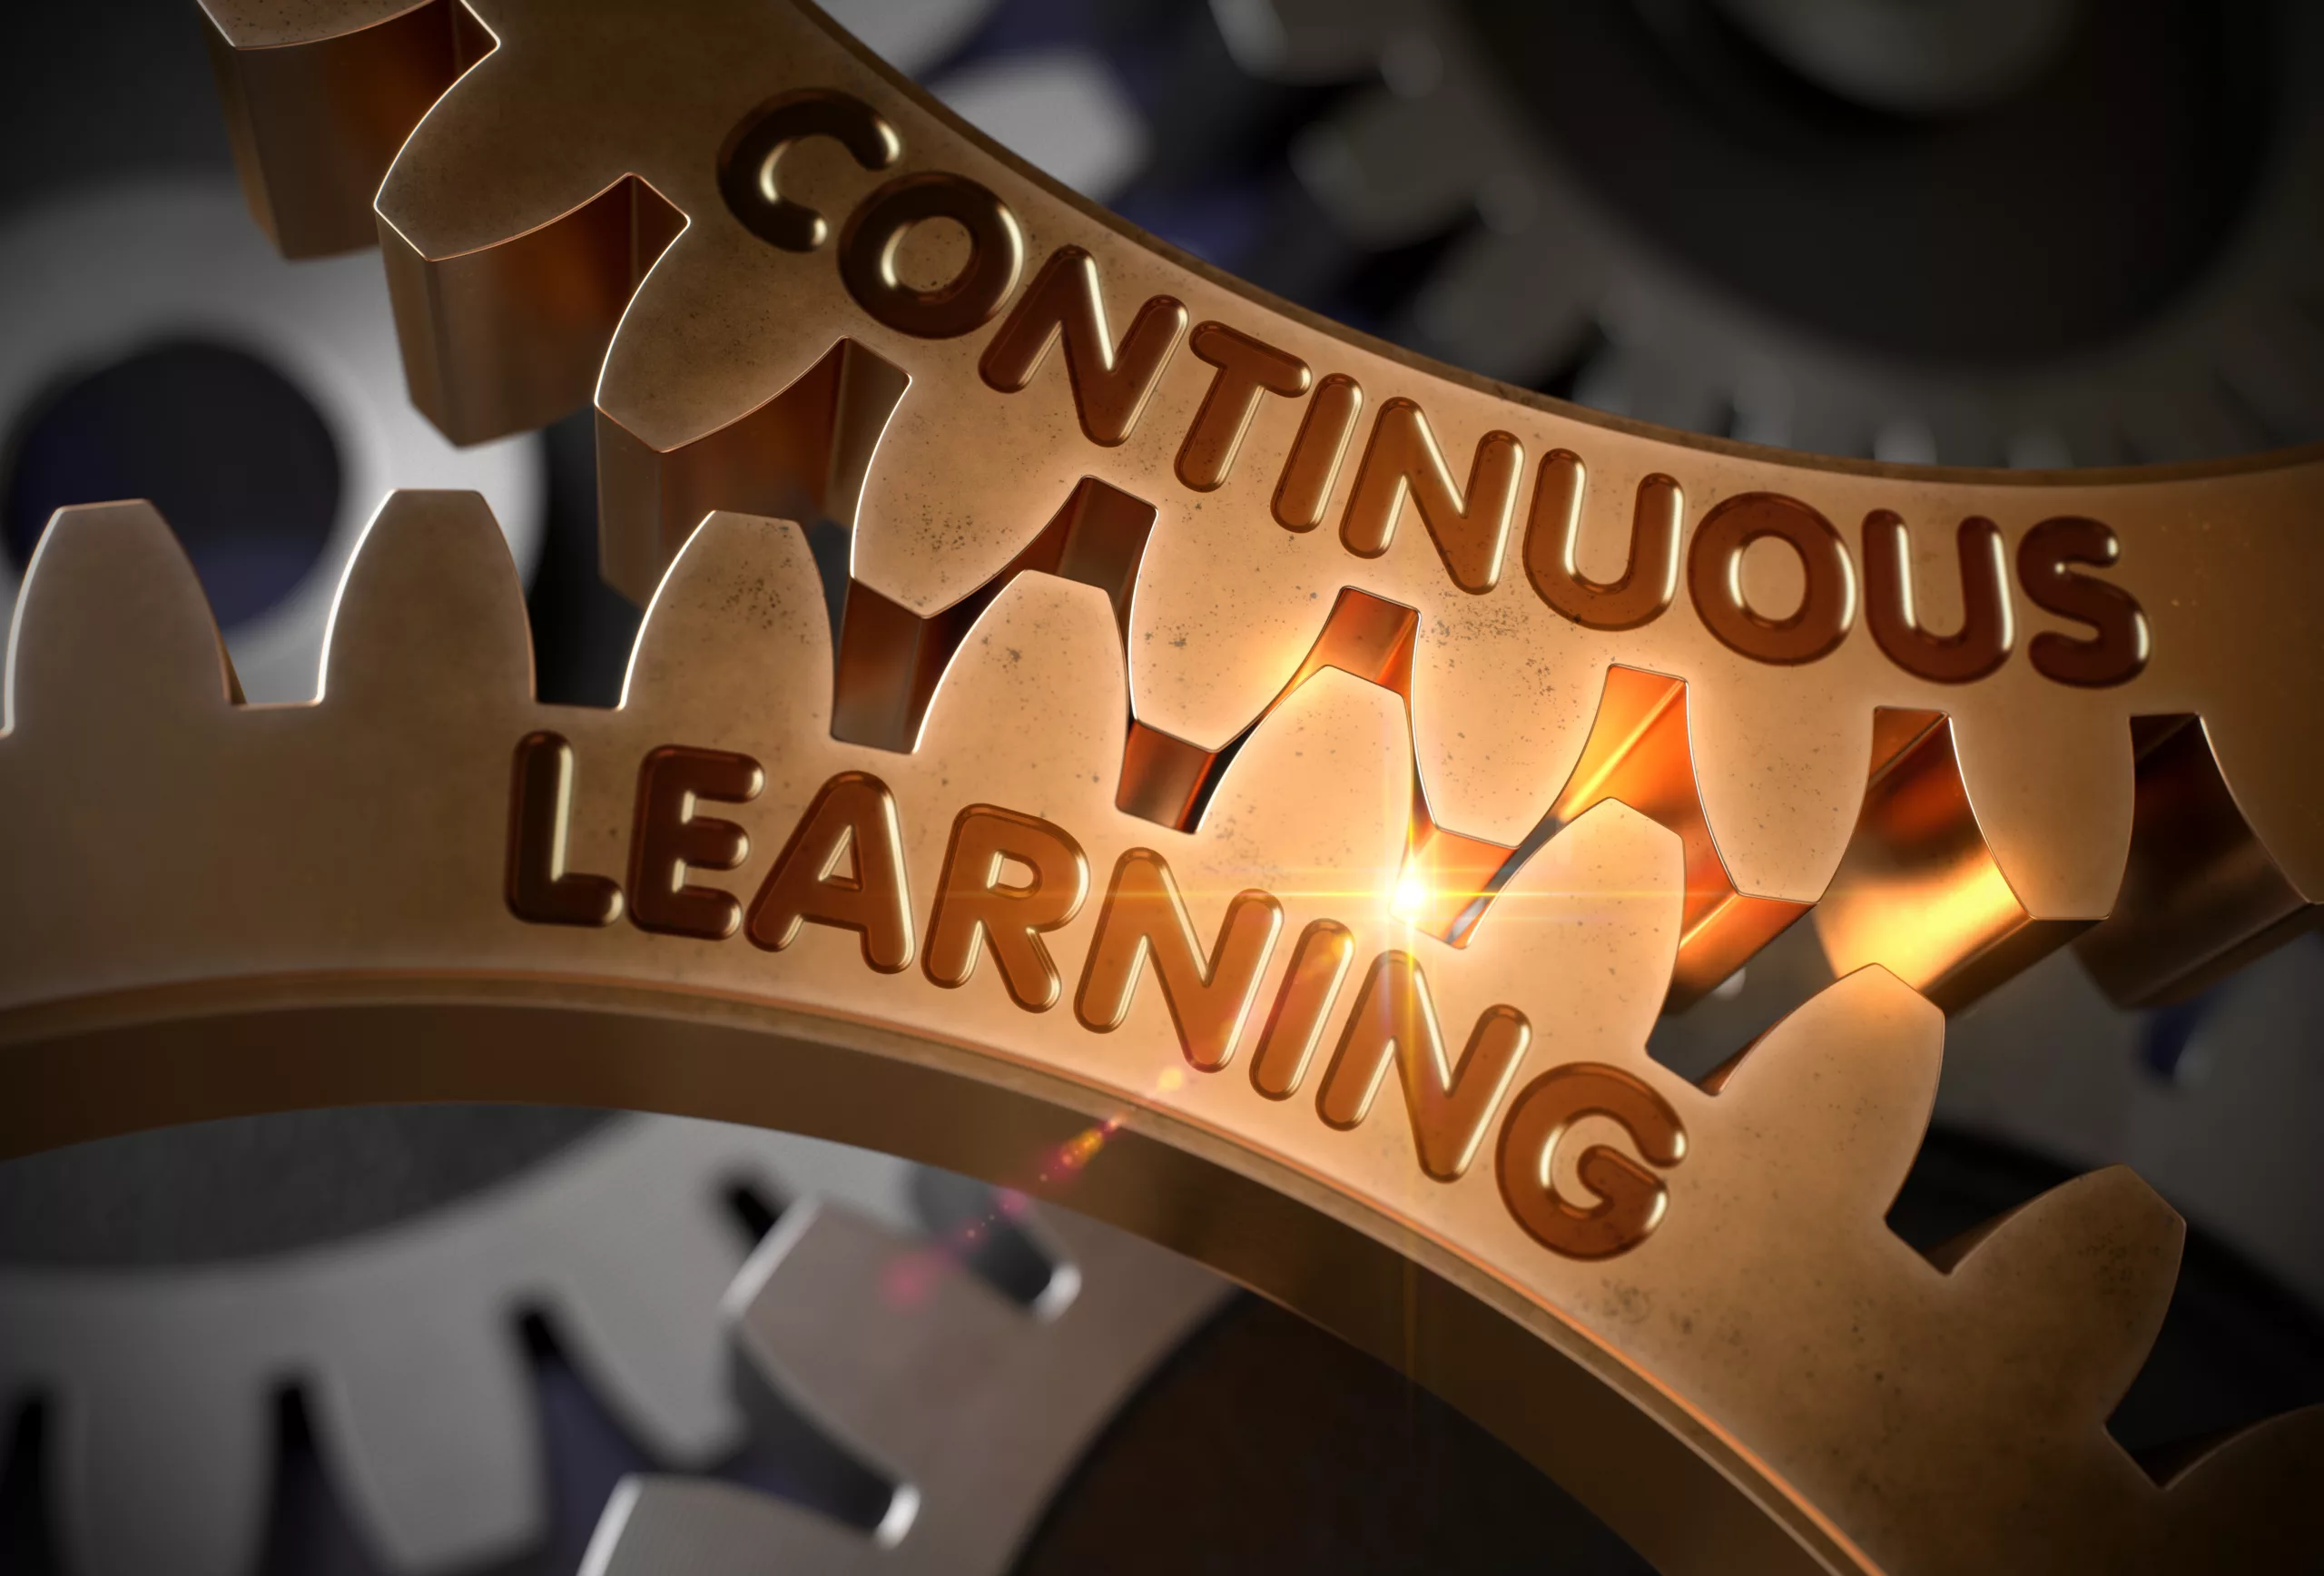 Continuous learning